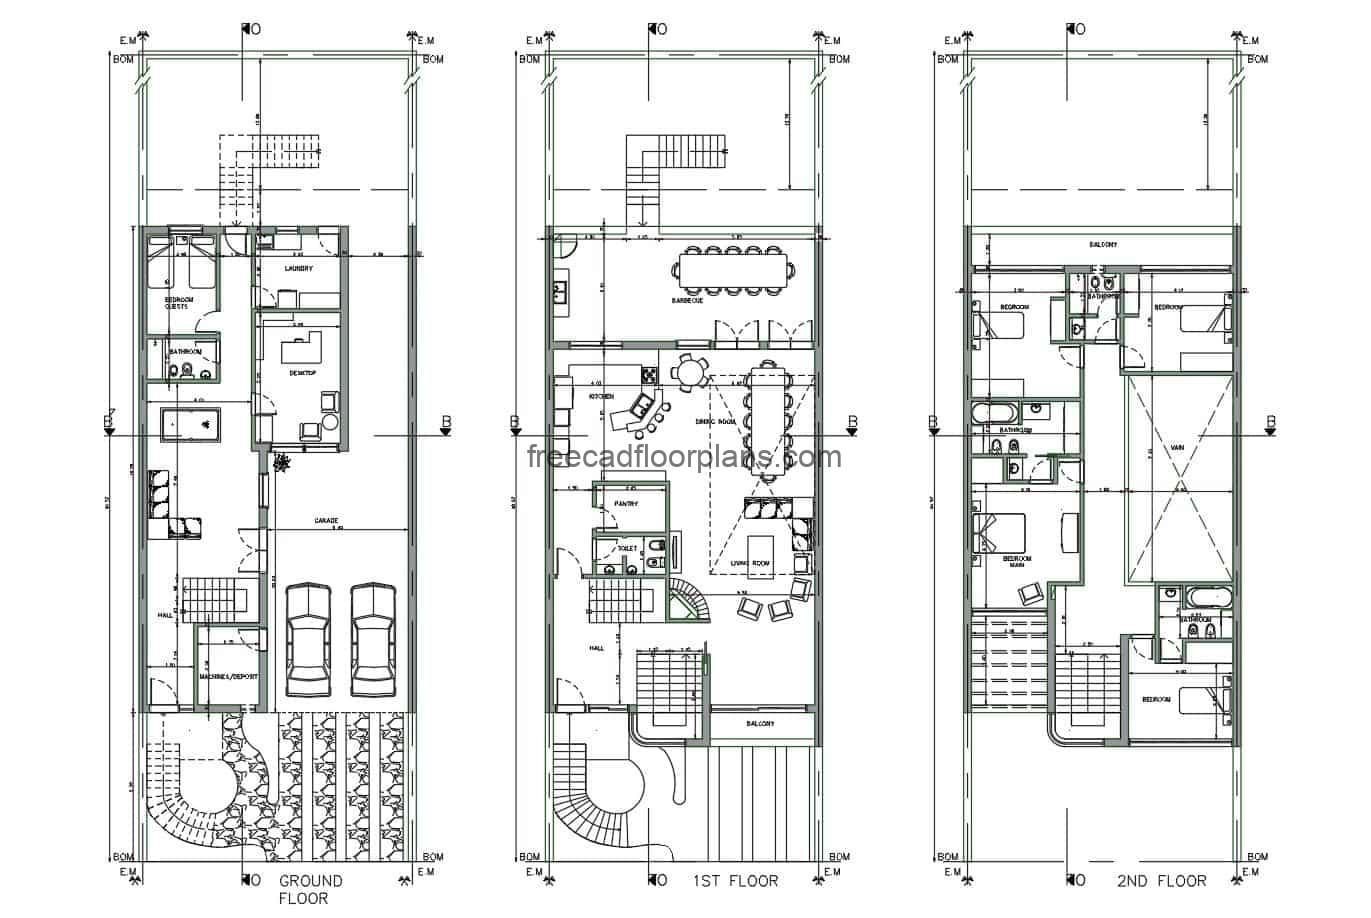 Three level and four bedroom house with slylight on the roof, the residence has basic distribution in the first level has a guest room, play area, office, garage for two vehicles, laundry area, second level living room, kitchen, bbq area and balcony and third level has a private area with four bedrooms. Plans drawn in Autocad DWG format, architectural and dimensional plants, with structural details for free download